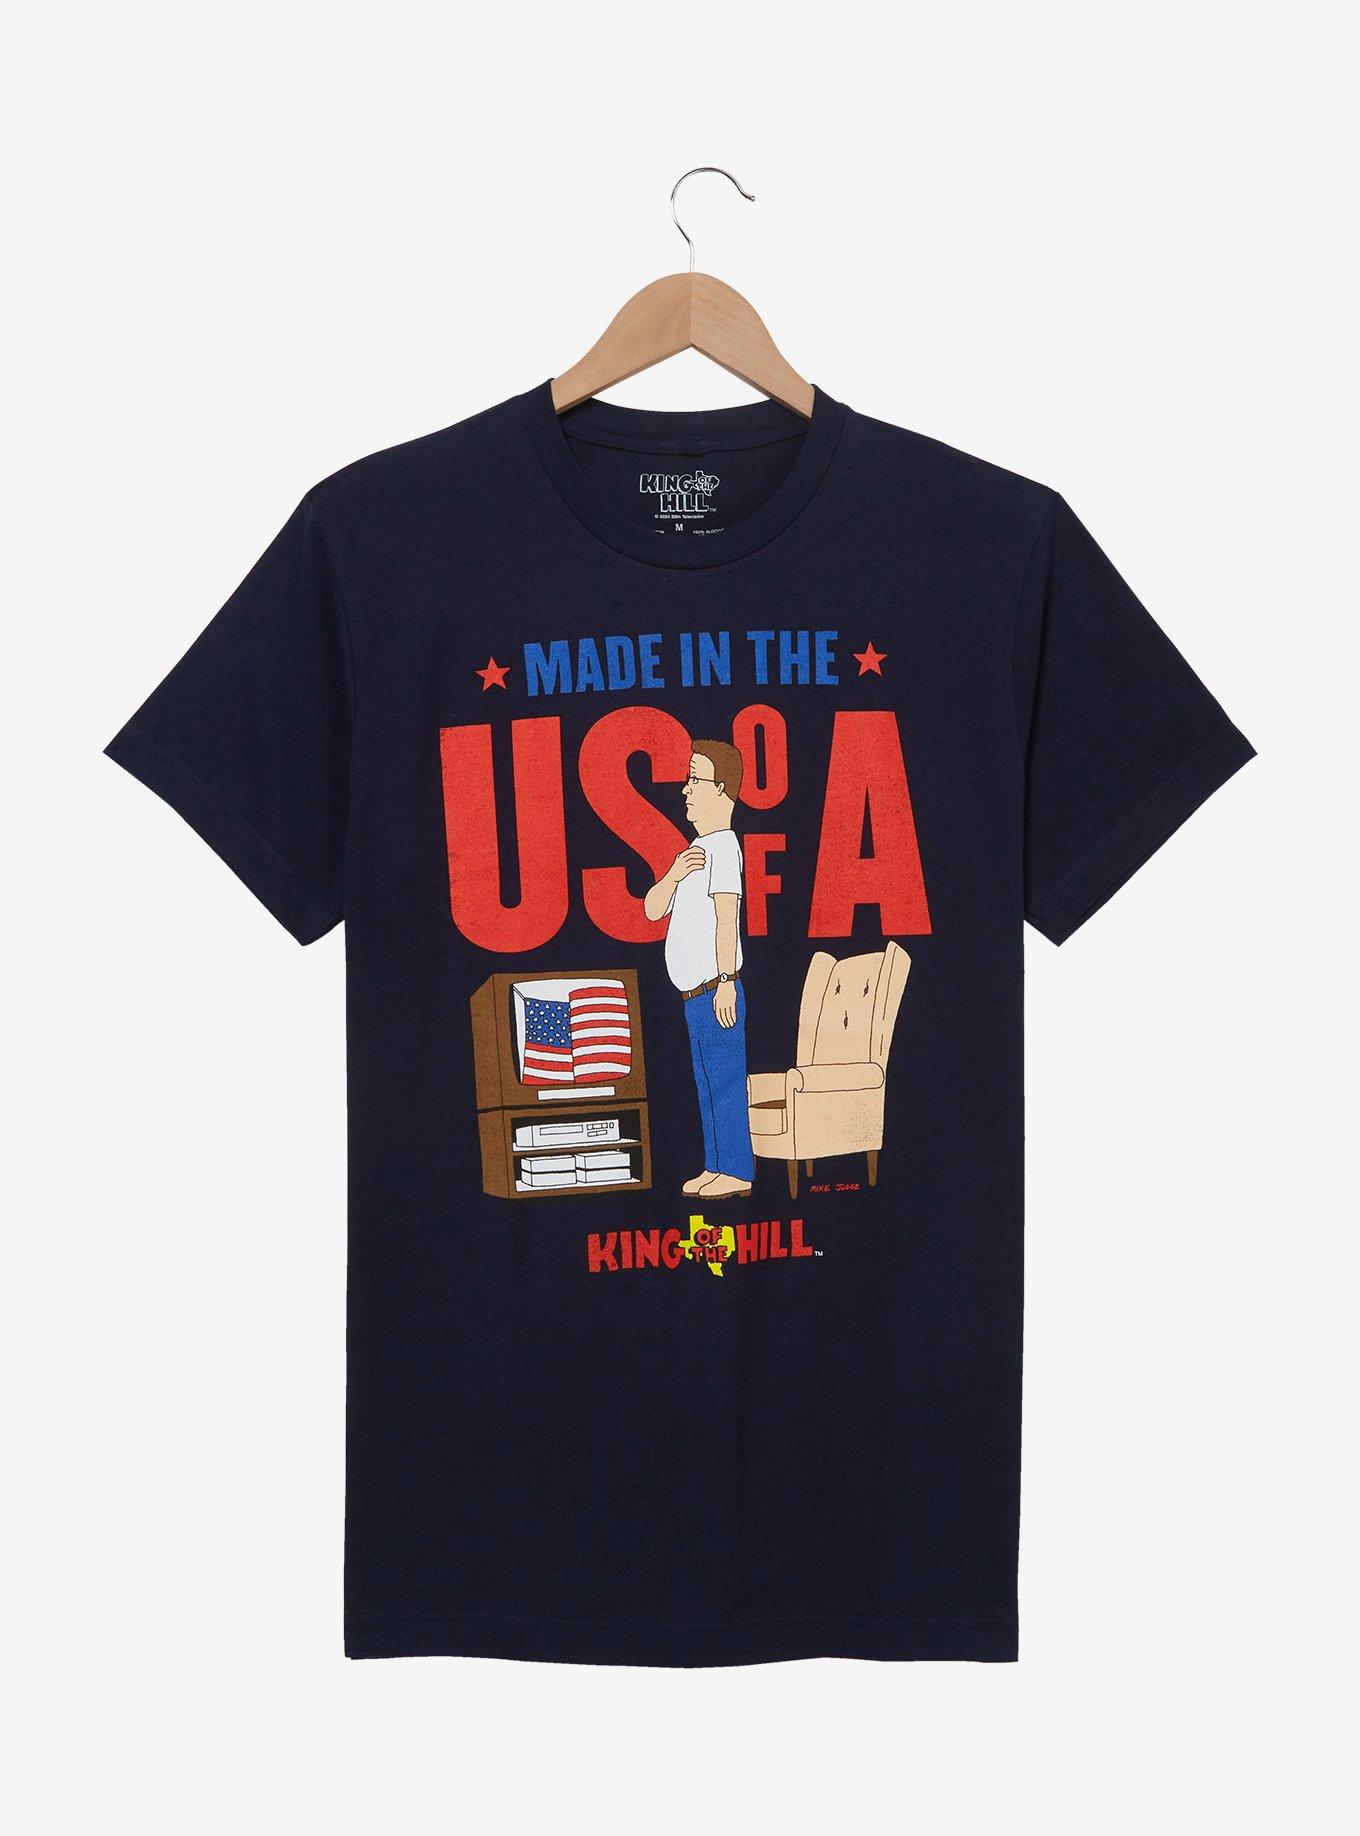 King of the Hill Hank Hill Made in the USA T-Shirt - BoxLunch Exclusive